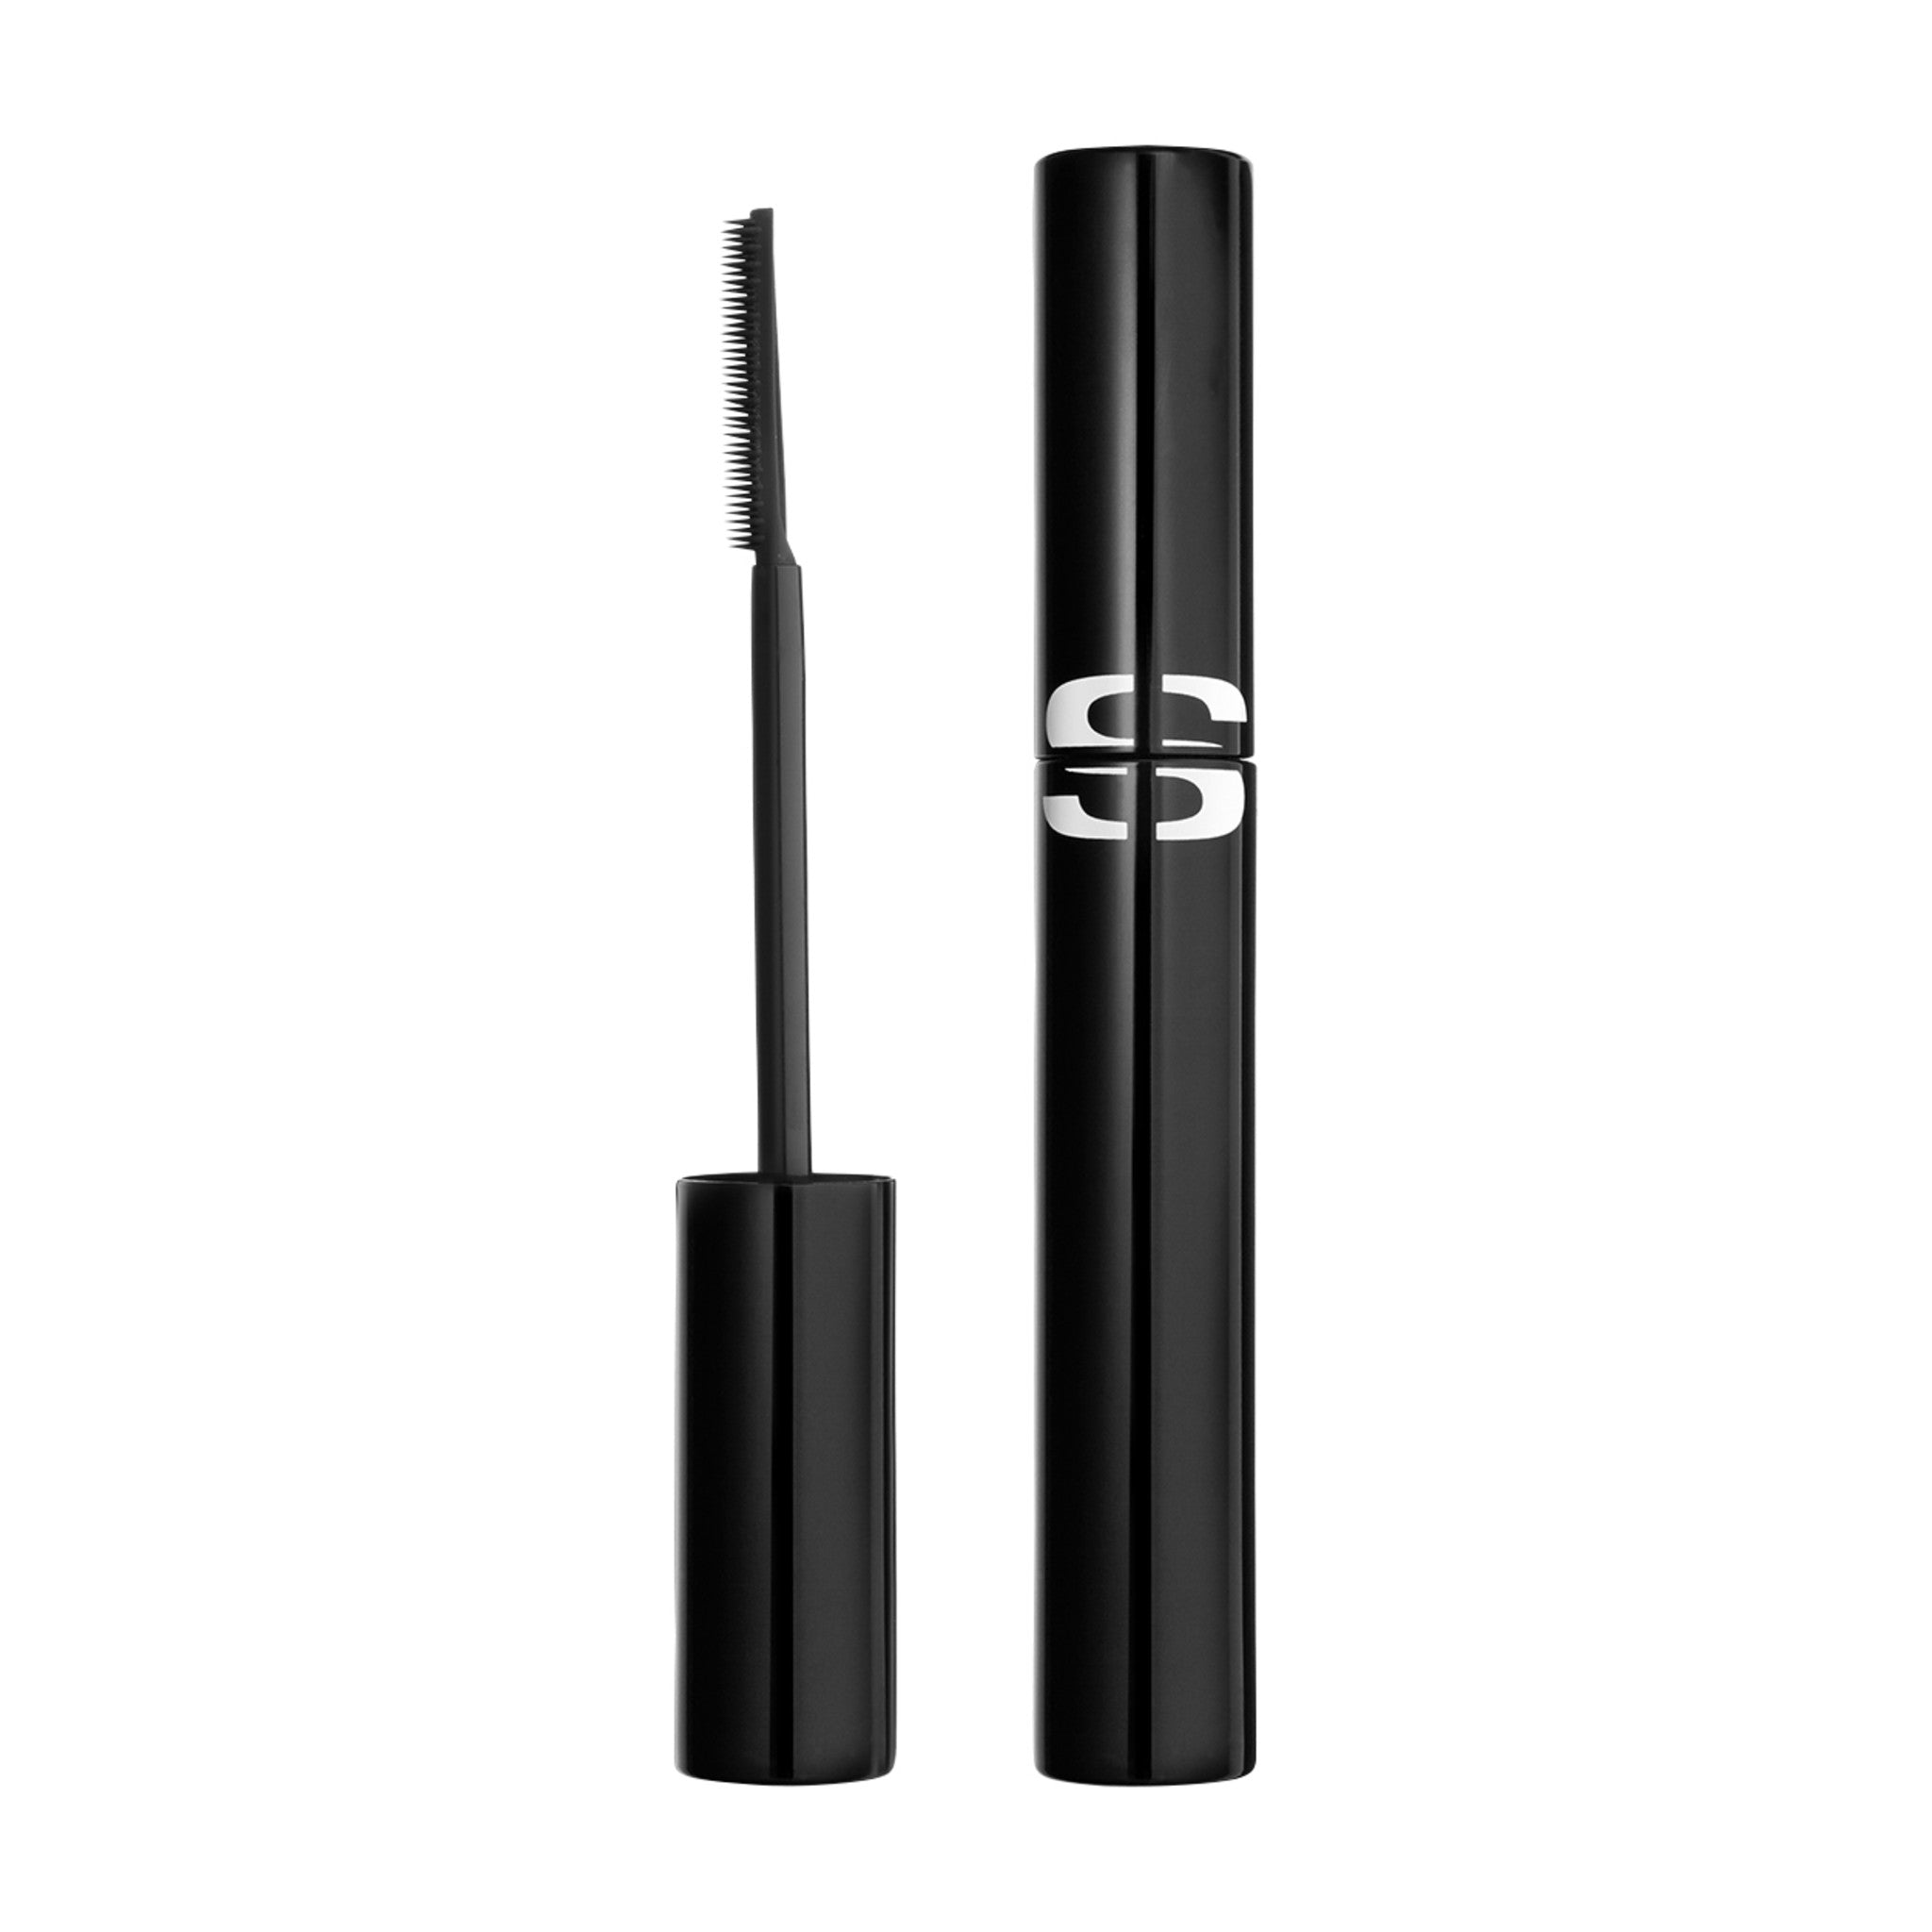 Sisley-Paris So Intense Mascara Color/Shade variant: 1 Deep Black main image. This product is in the color black